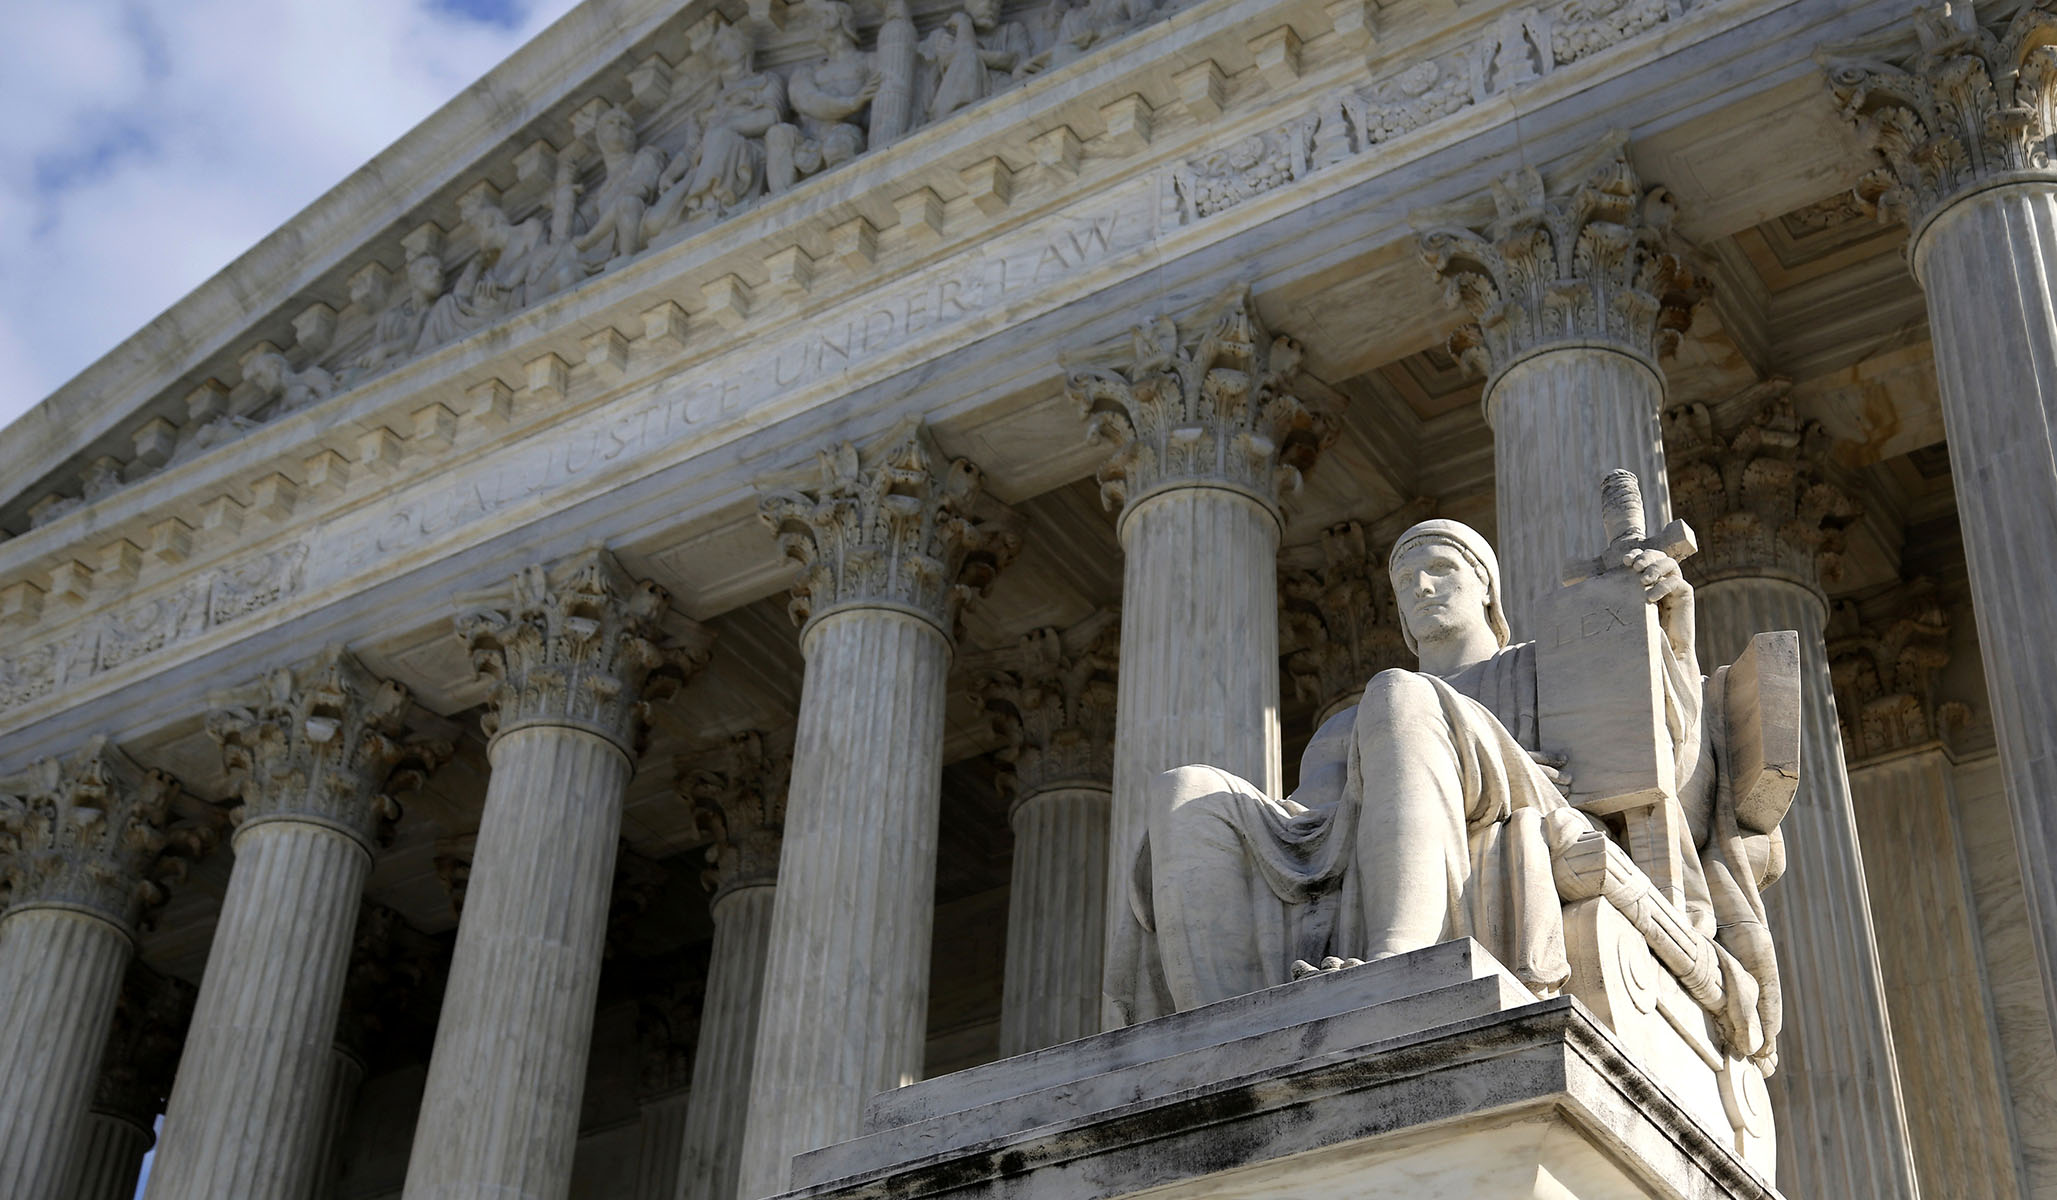 how did the judicial system block president roosevelts plan to pack the supreme court